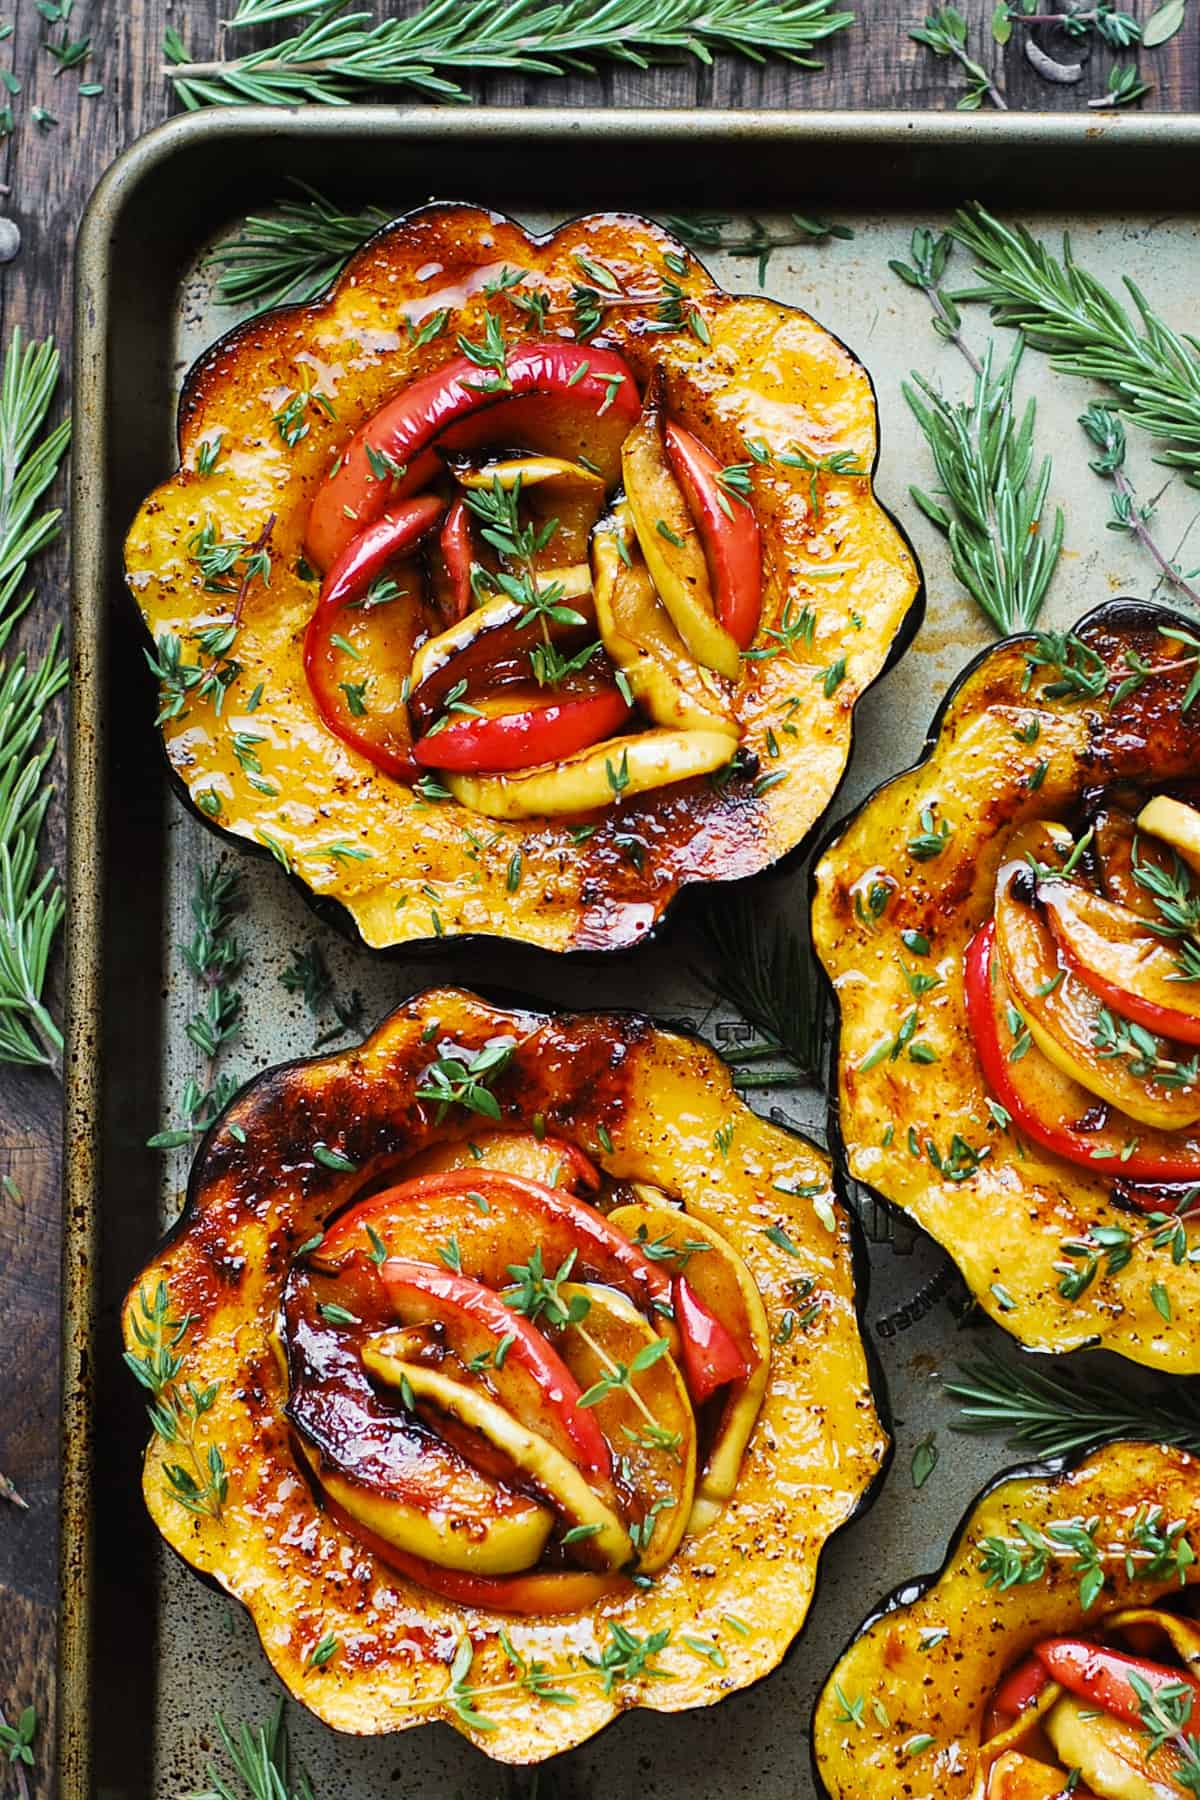 acorn squash halves stuffed with apples on a baking sheet